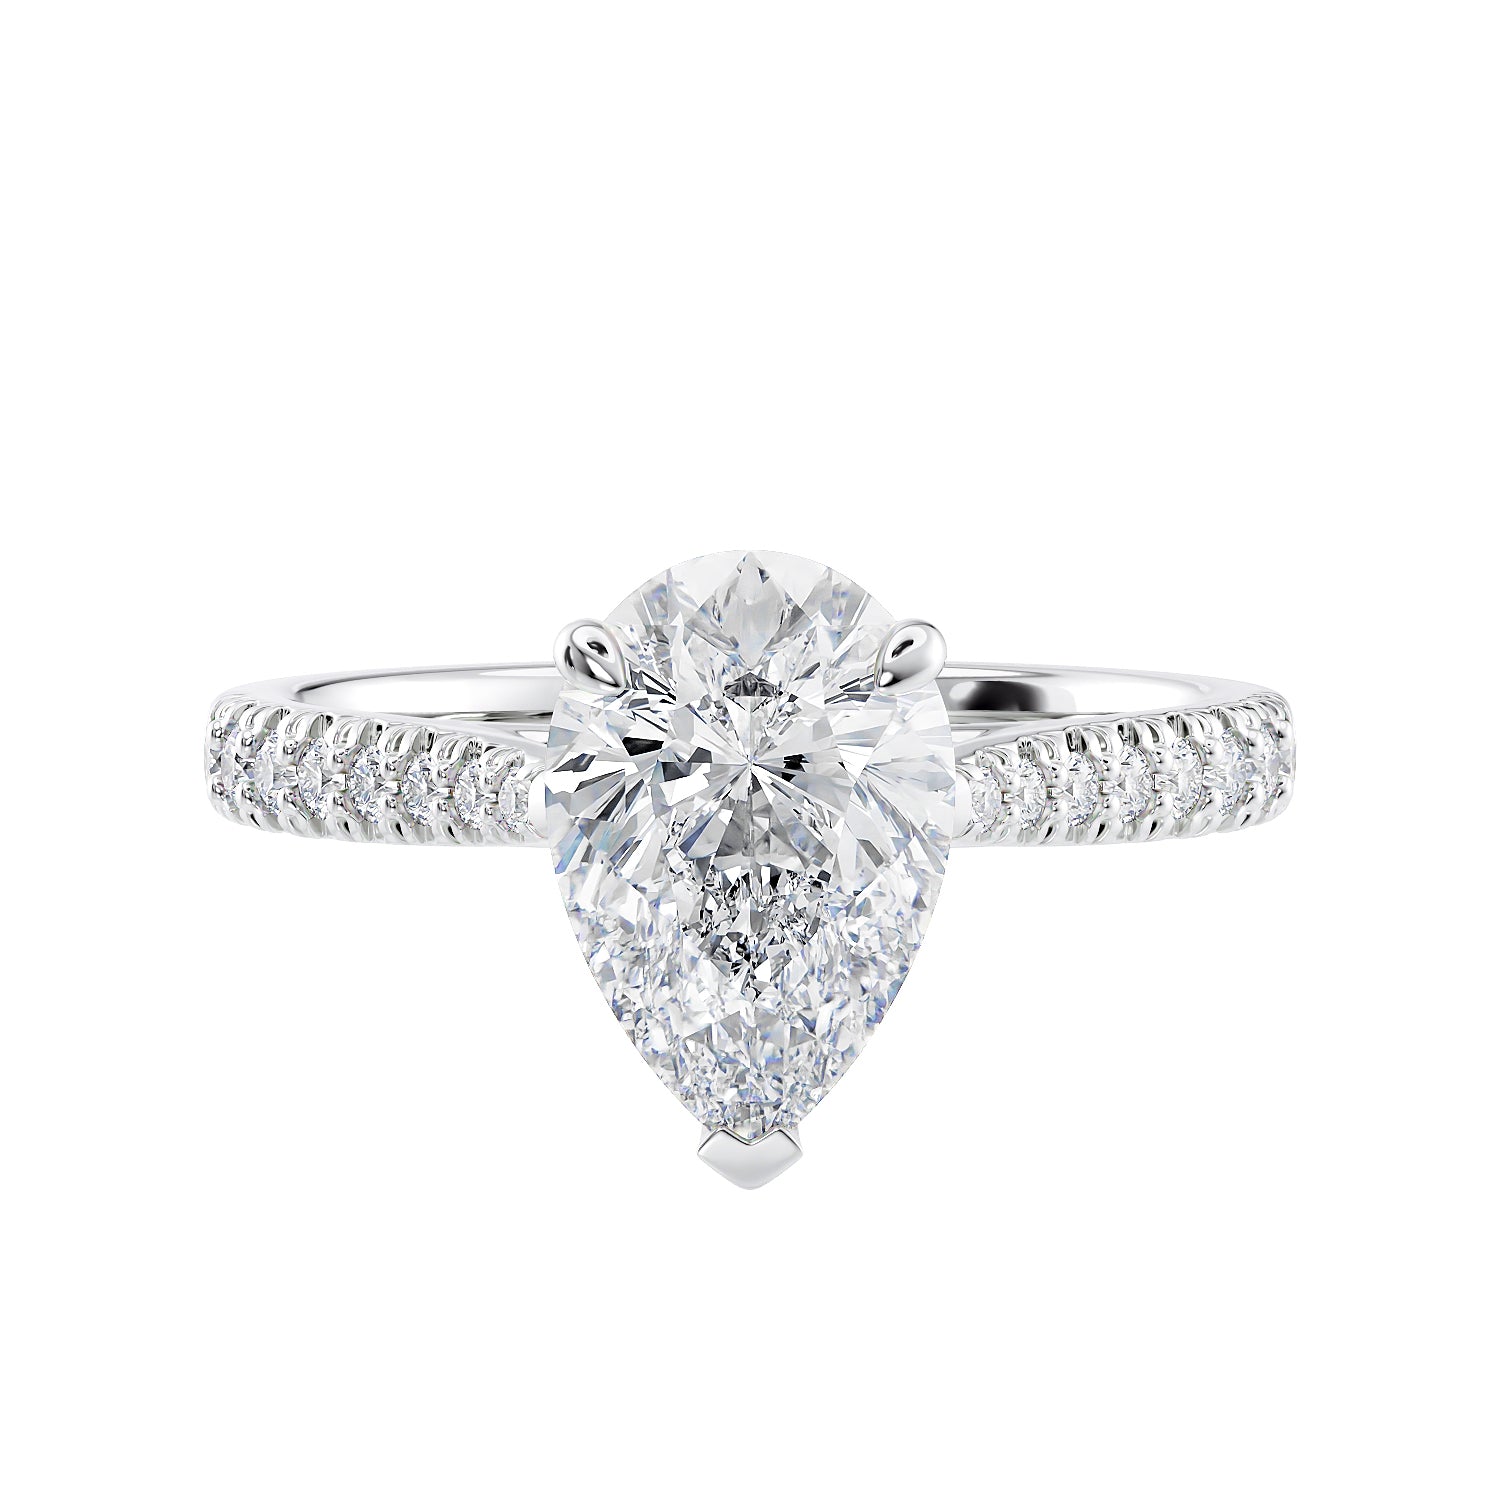 Pear cut lab grown diamond engagement ring with tapered diamond band white gold front view.